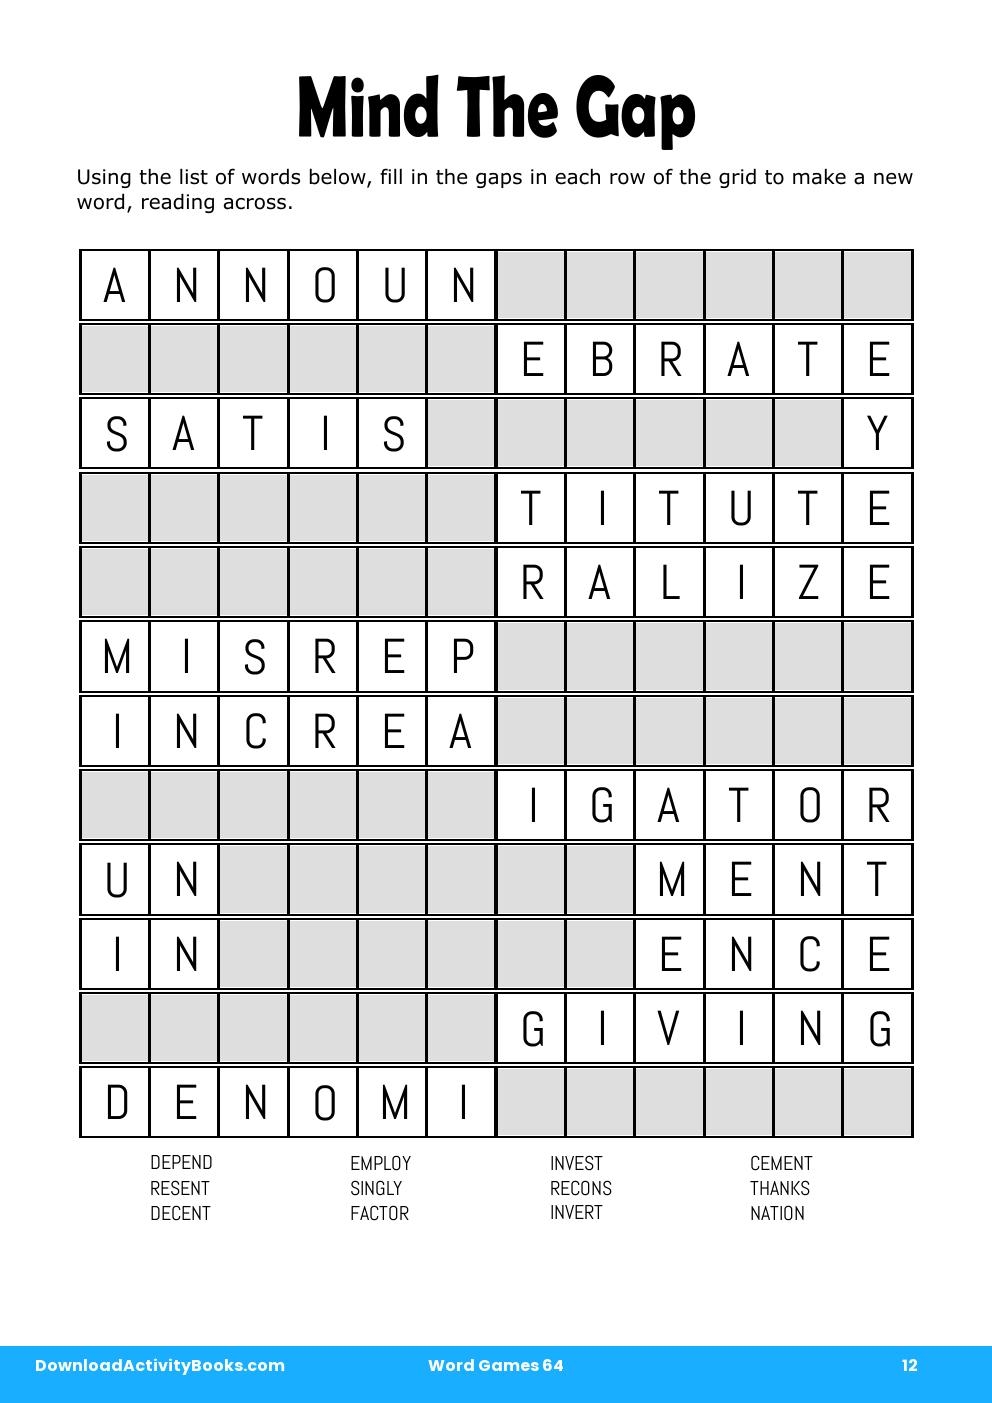 Mind The Gap in Word Games 64